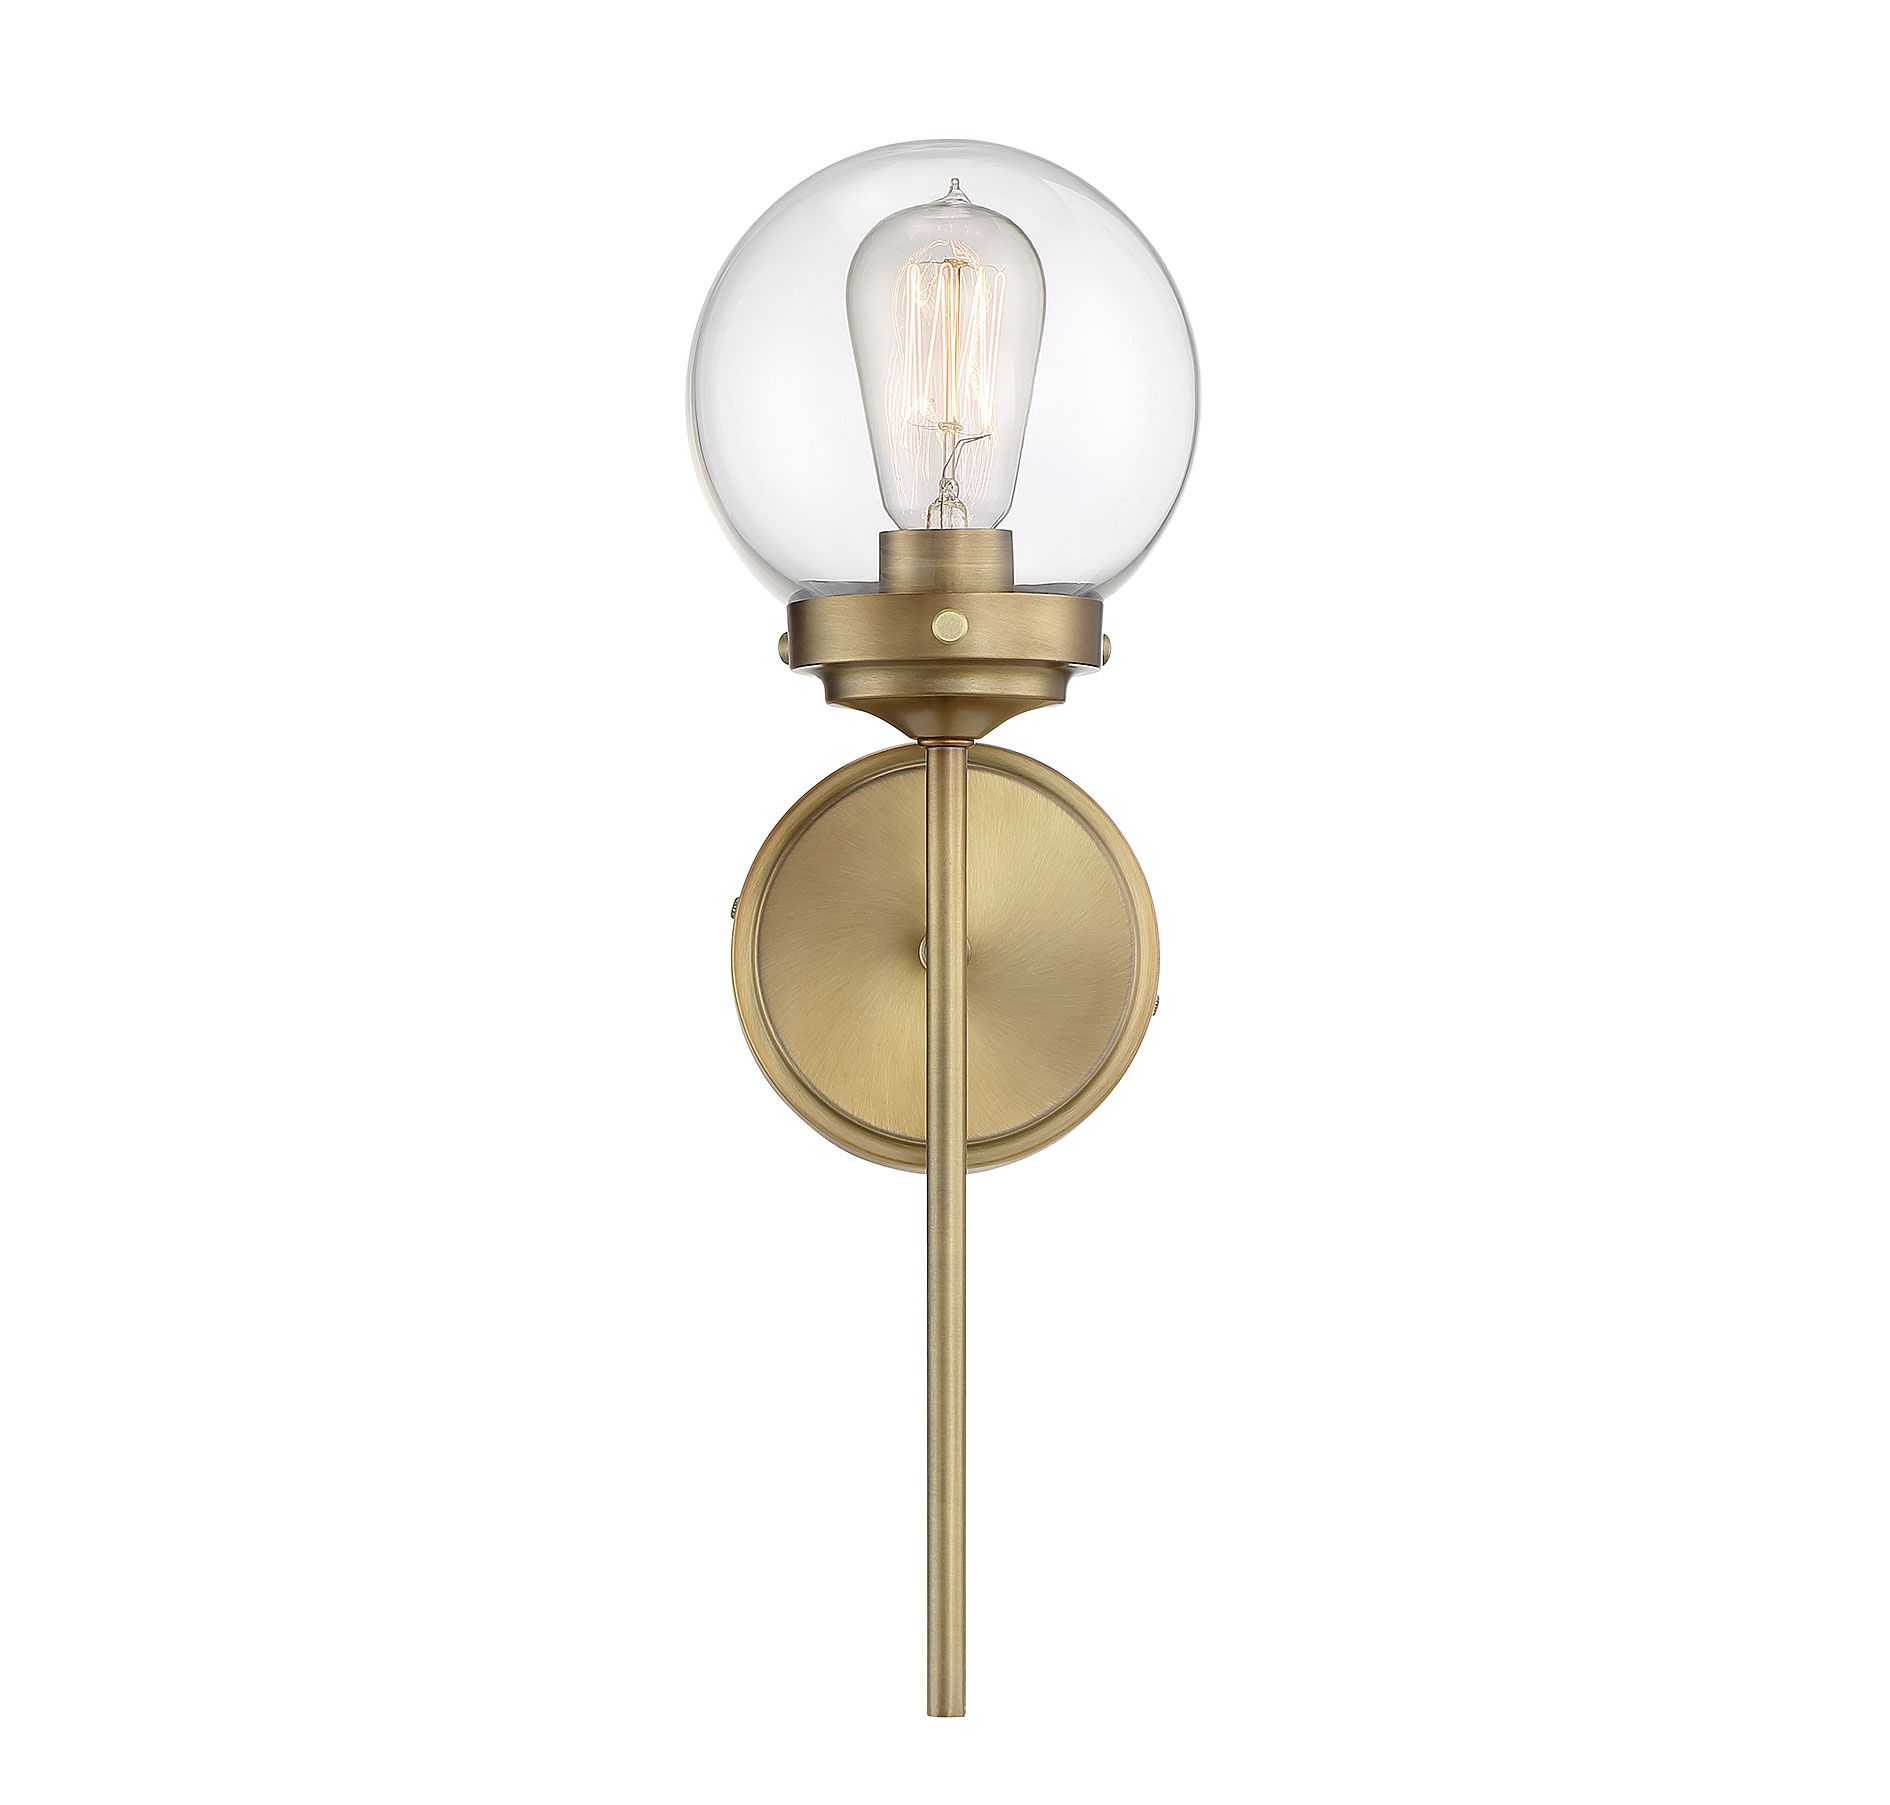 Trade Winds Lighting TW110030-NB Windsor 18" Wall Sconce in Natural Brass | Walmart (US)